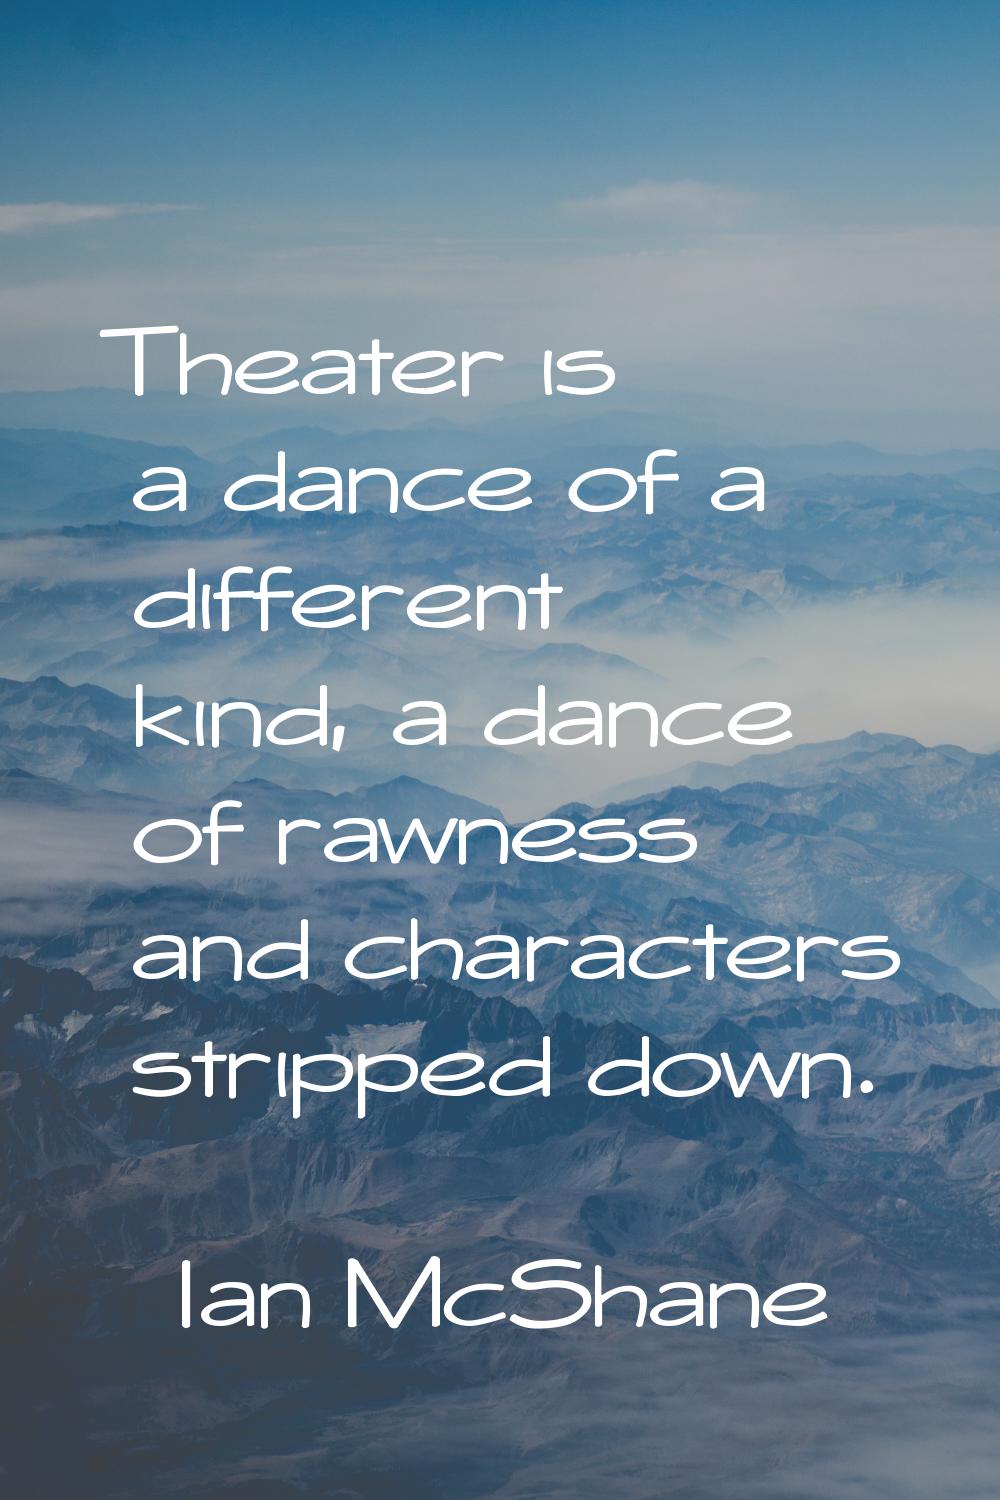 Theater is a dance of a different kind, a dance of rawness and characters stripped down.